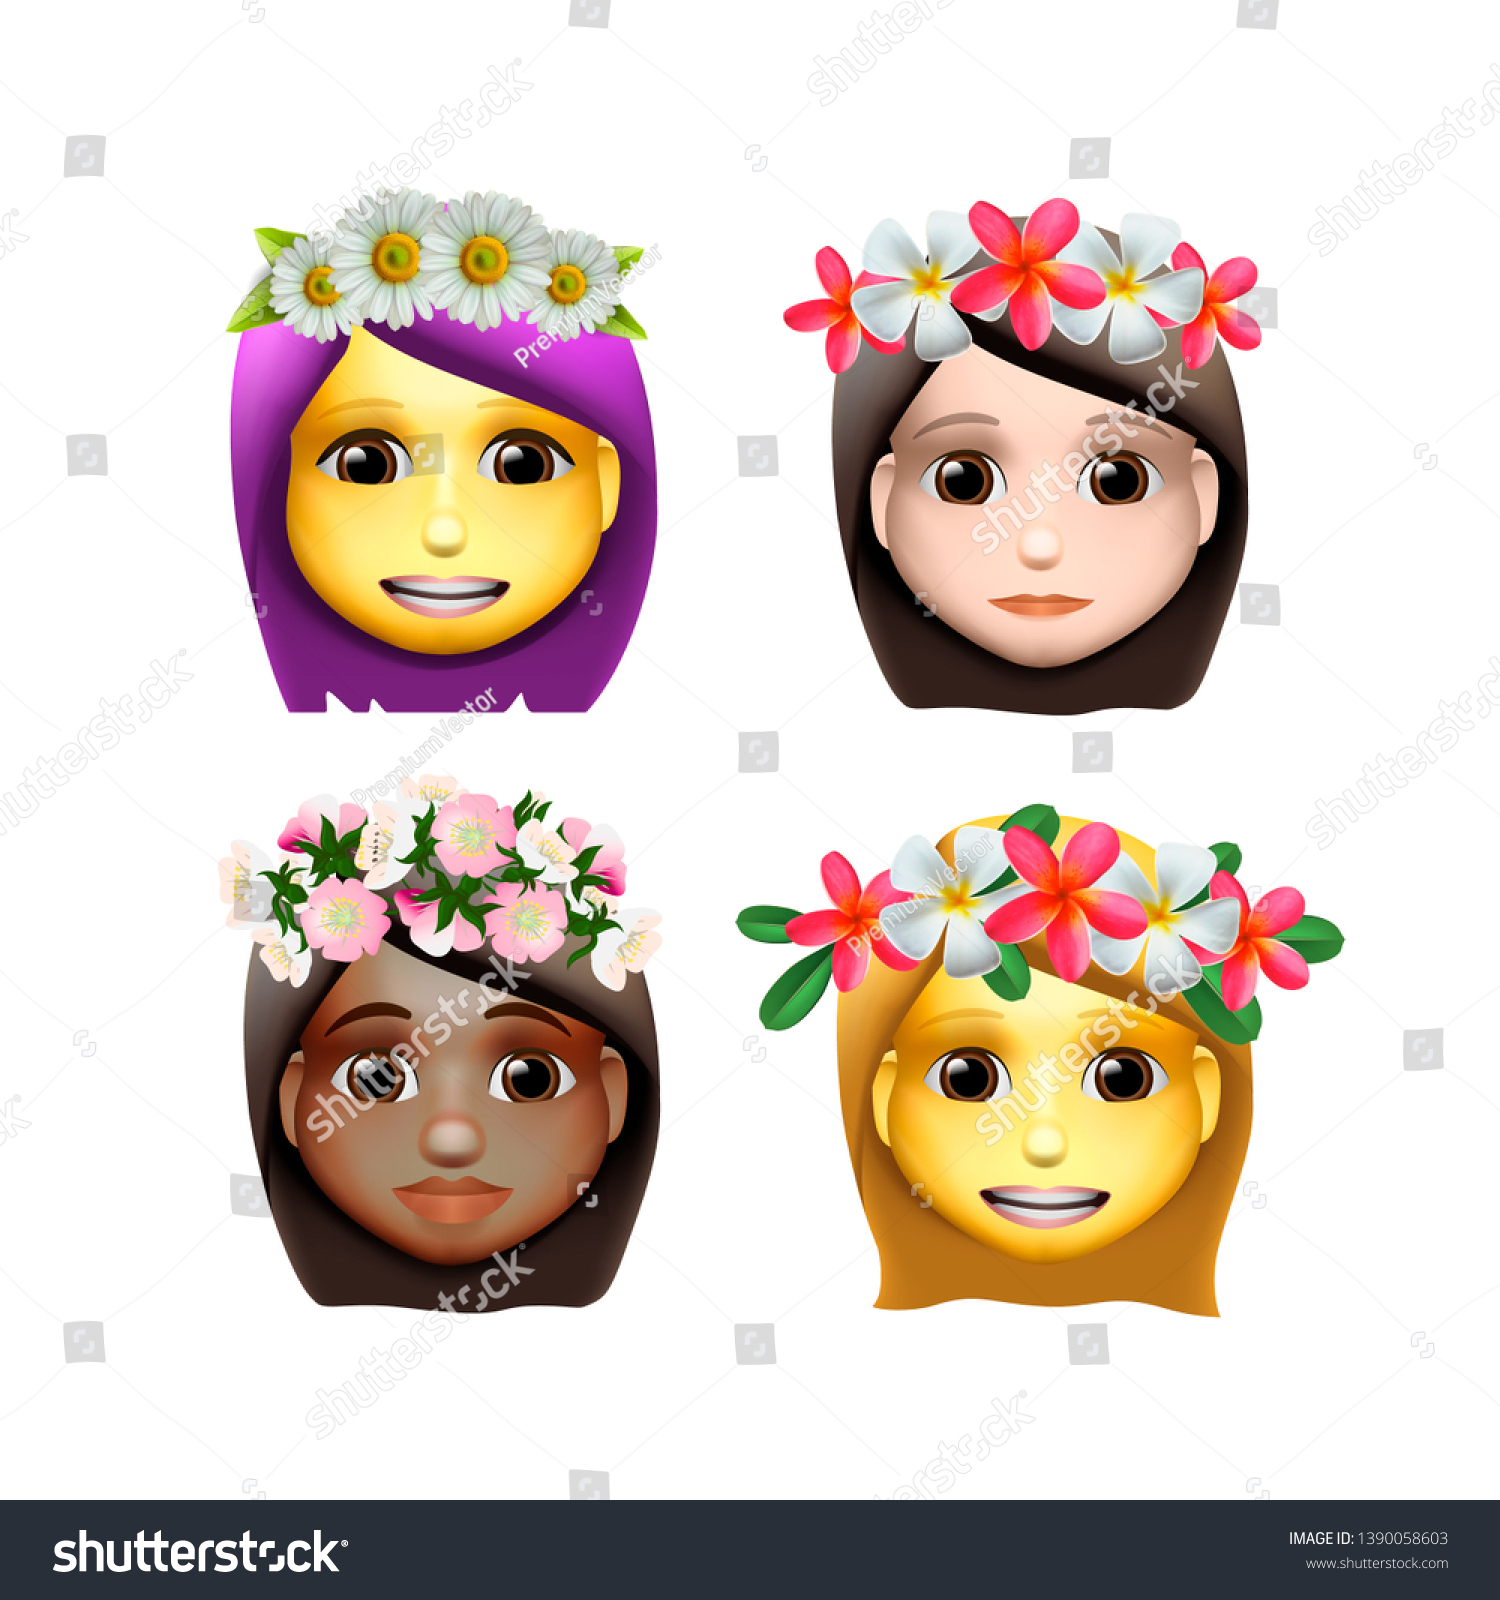 Smiley Face Emoji Characters Girls Avatars Stock Vector Royalty Free Shutterstock